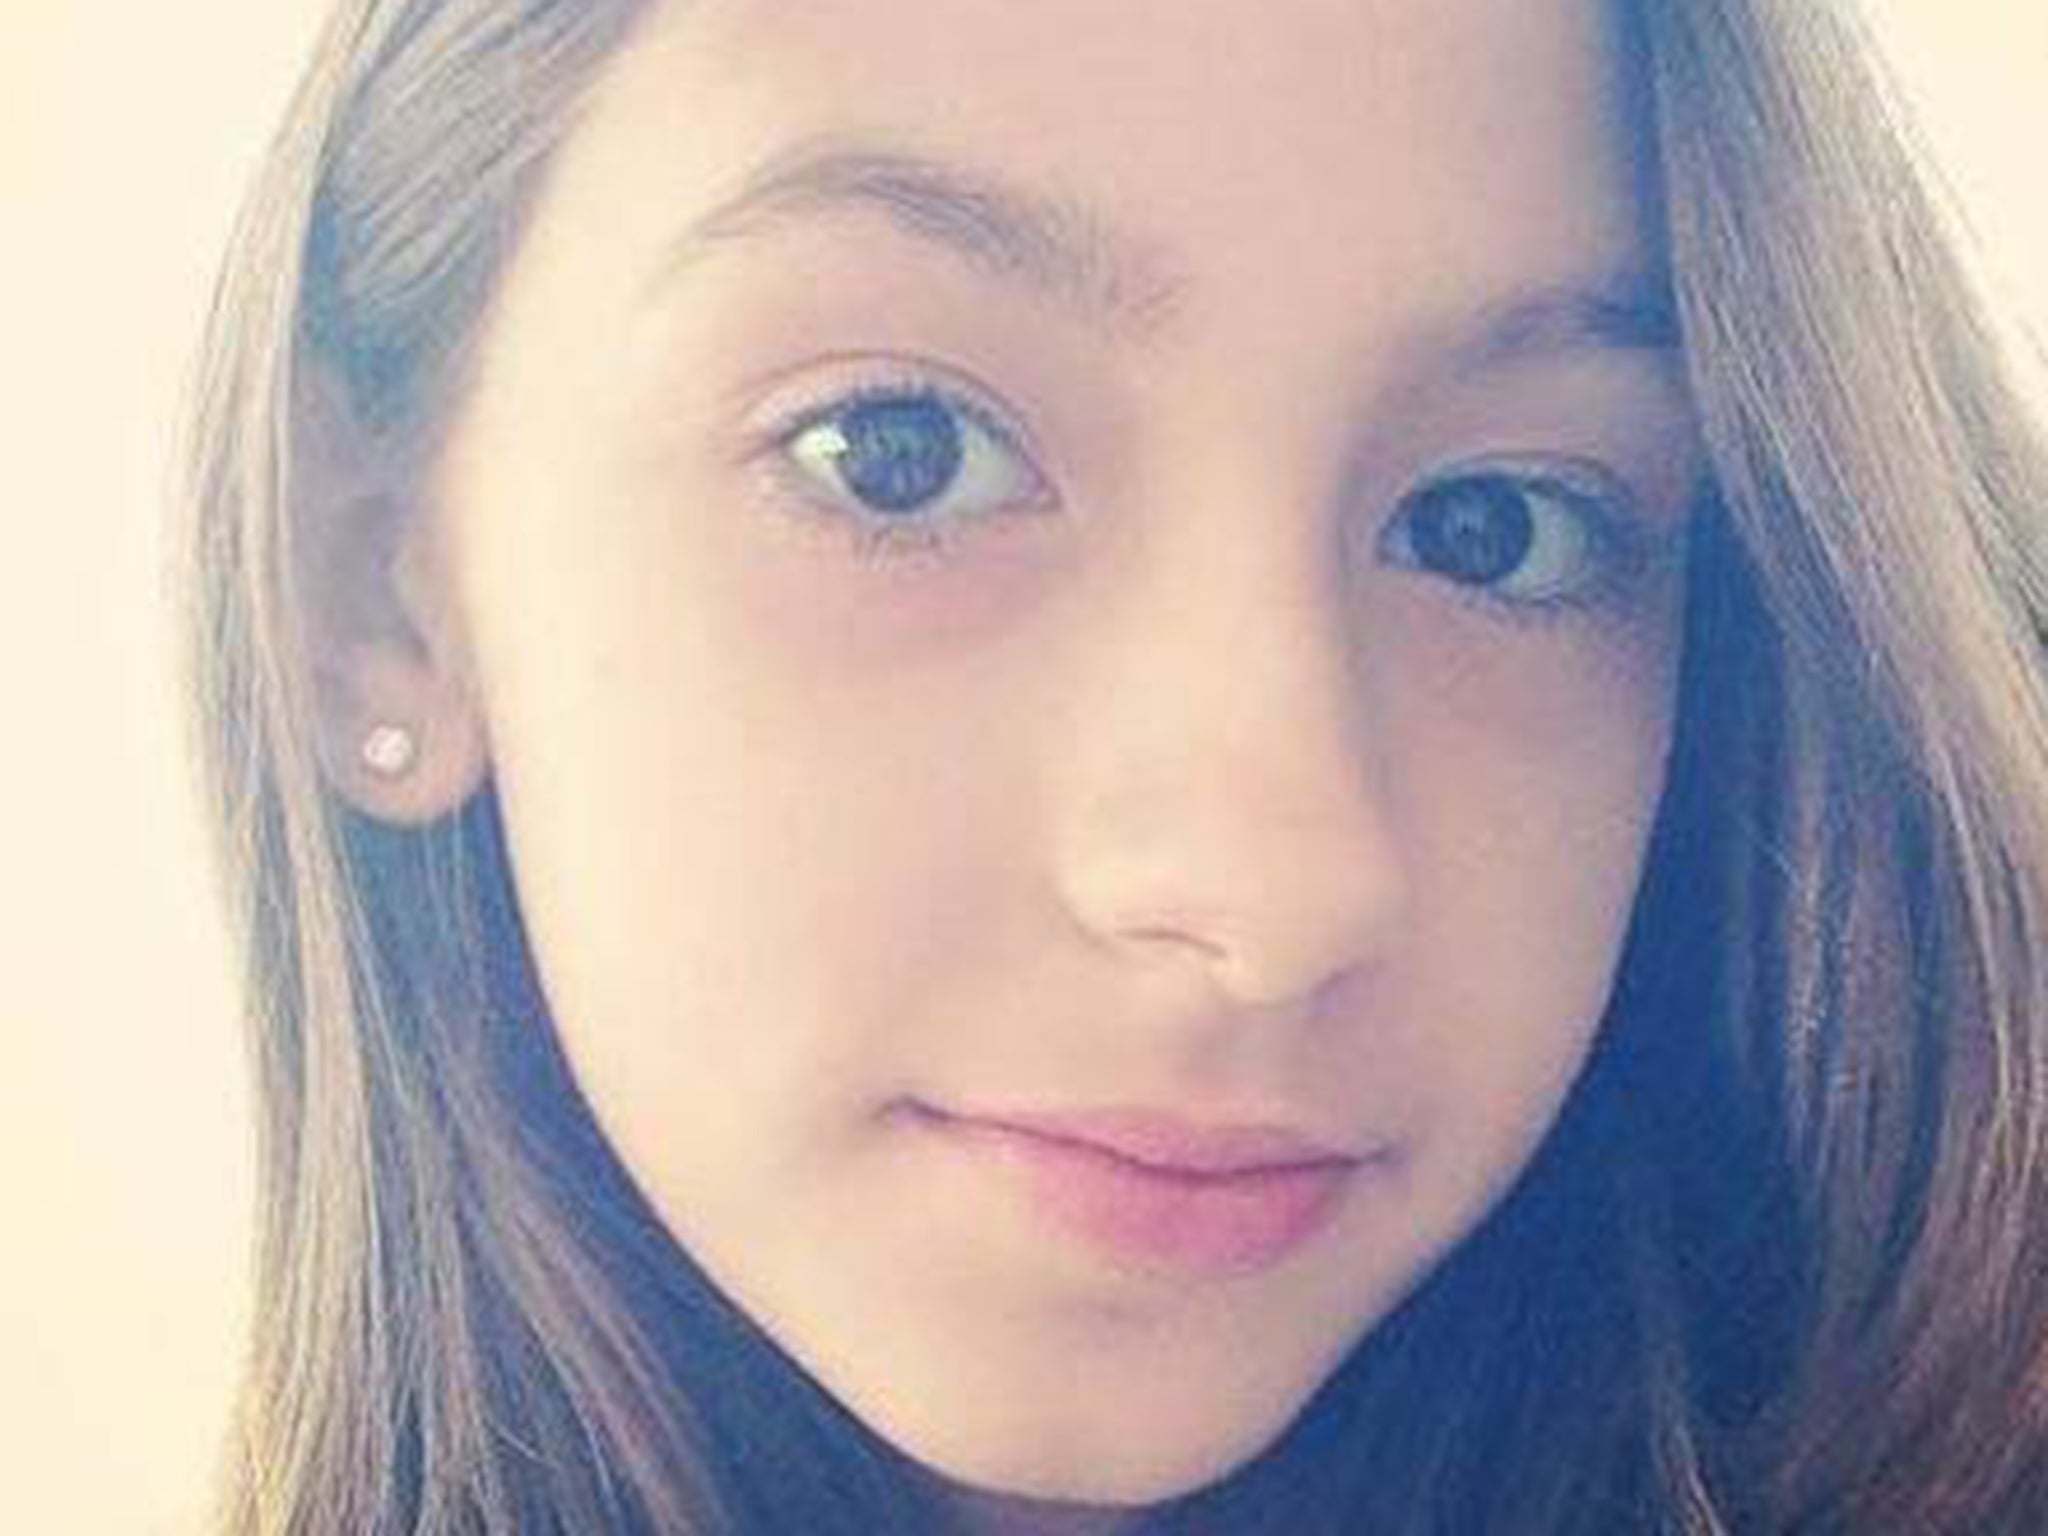 12 Year Old Girl Fatally Shot By Police In Pennsylvania The Independent 